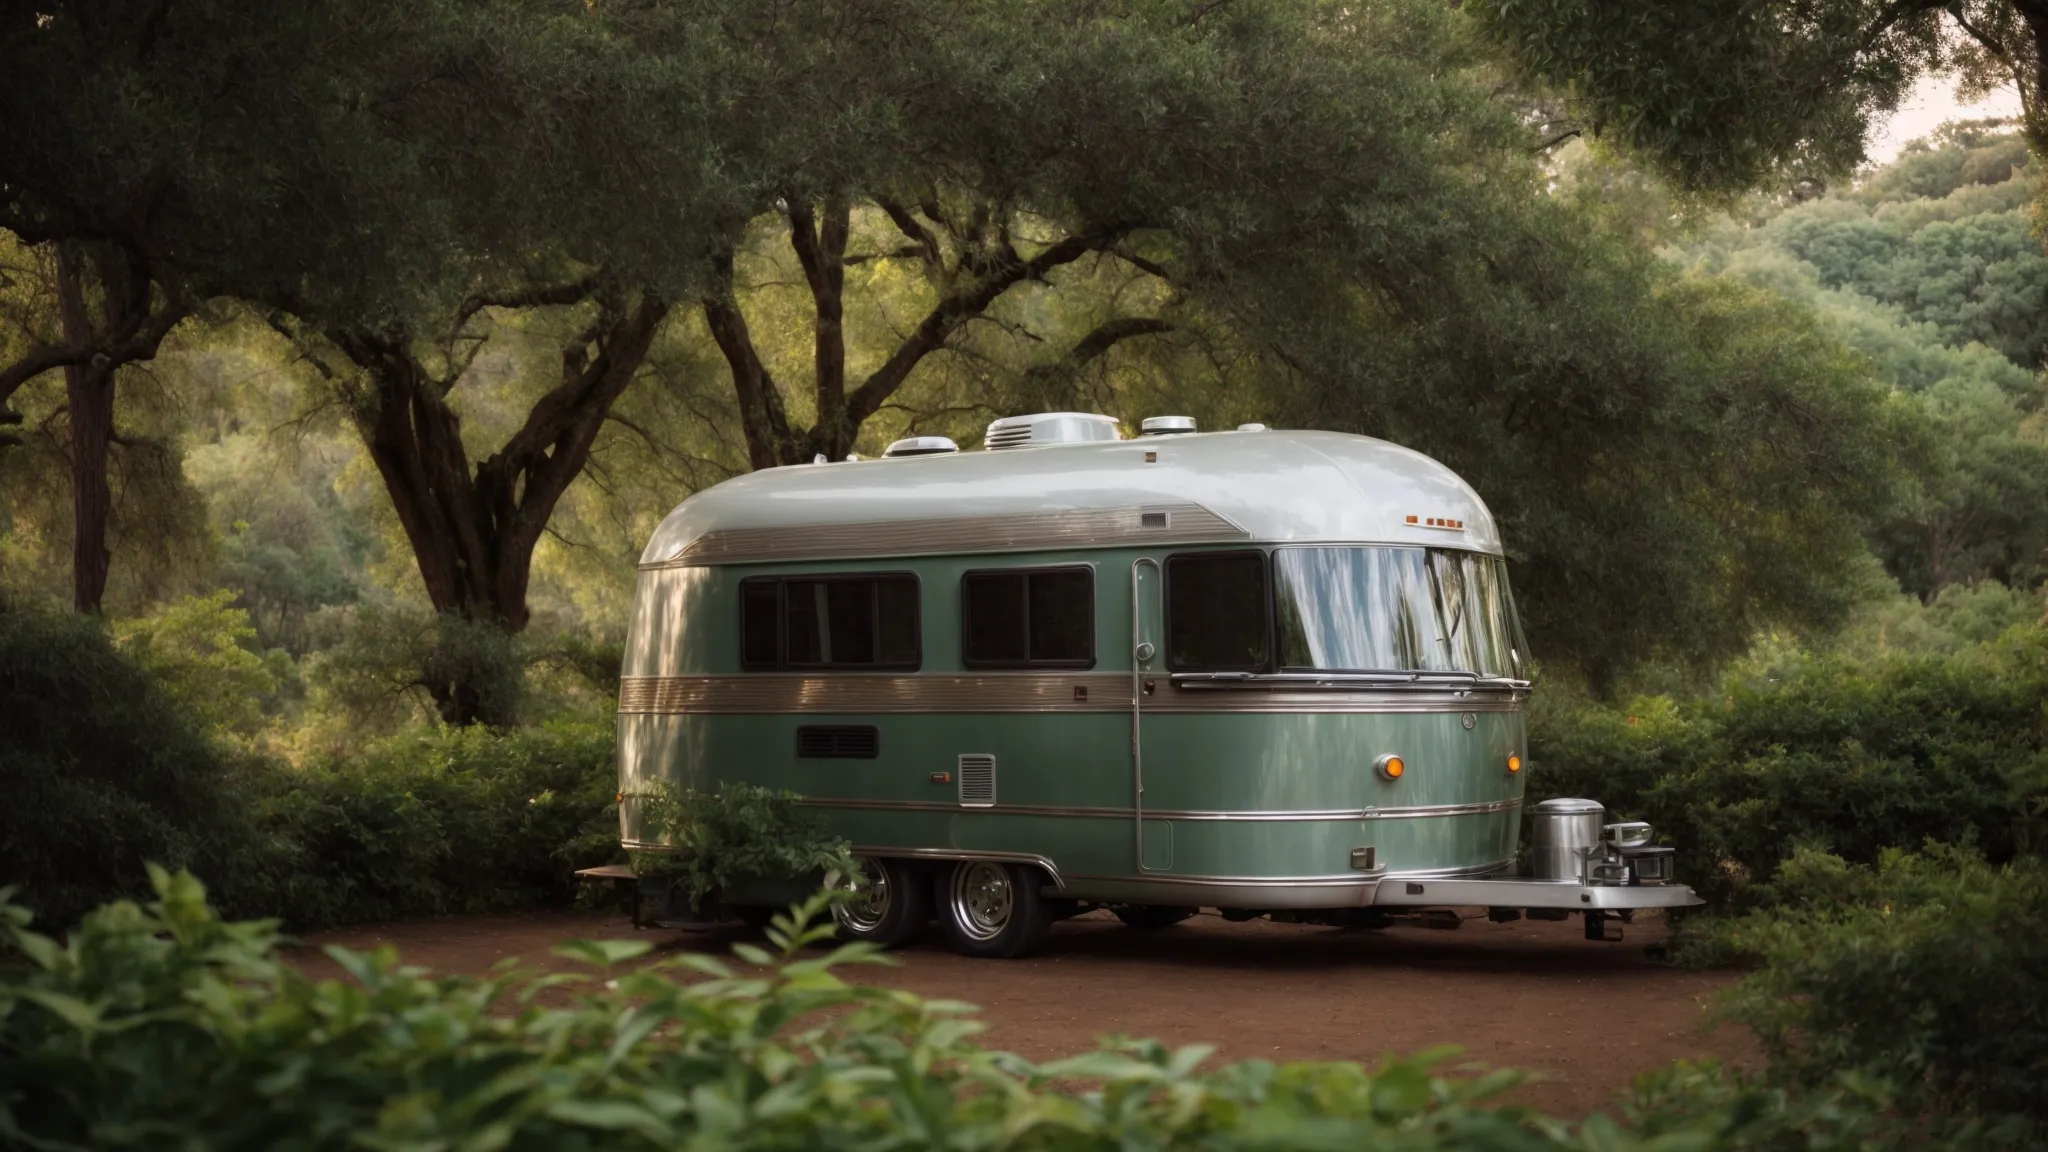 a cozy rv parked amidst lush greenery overlooking a serene park landscape.